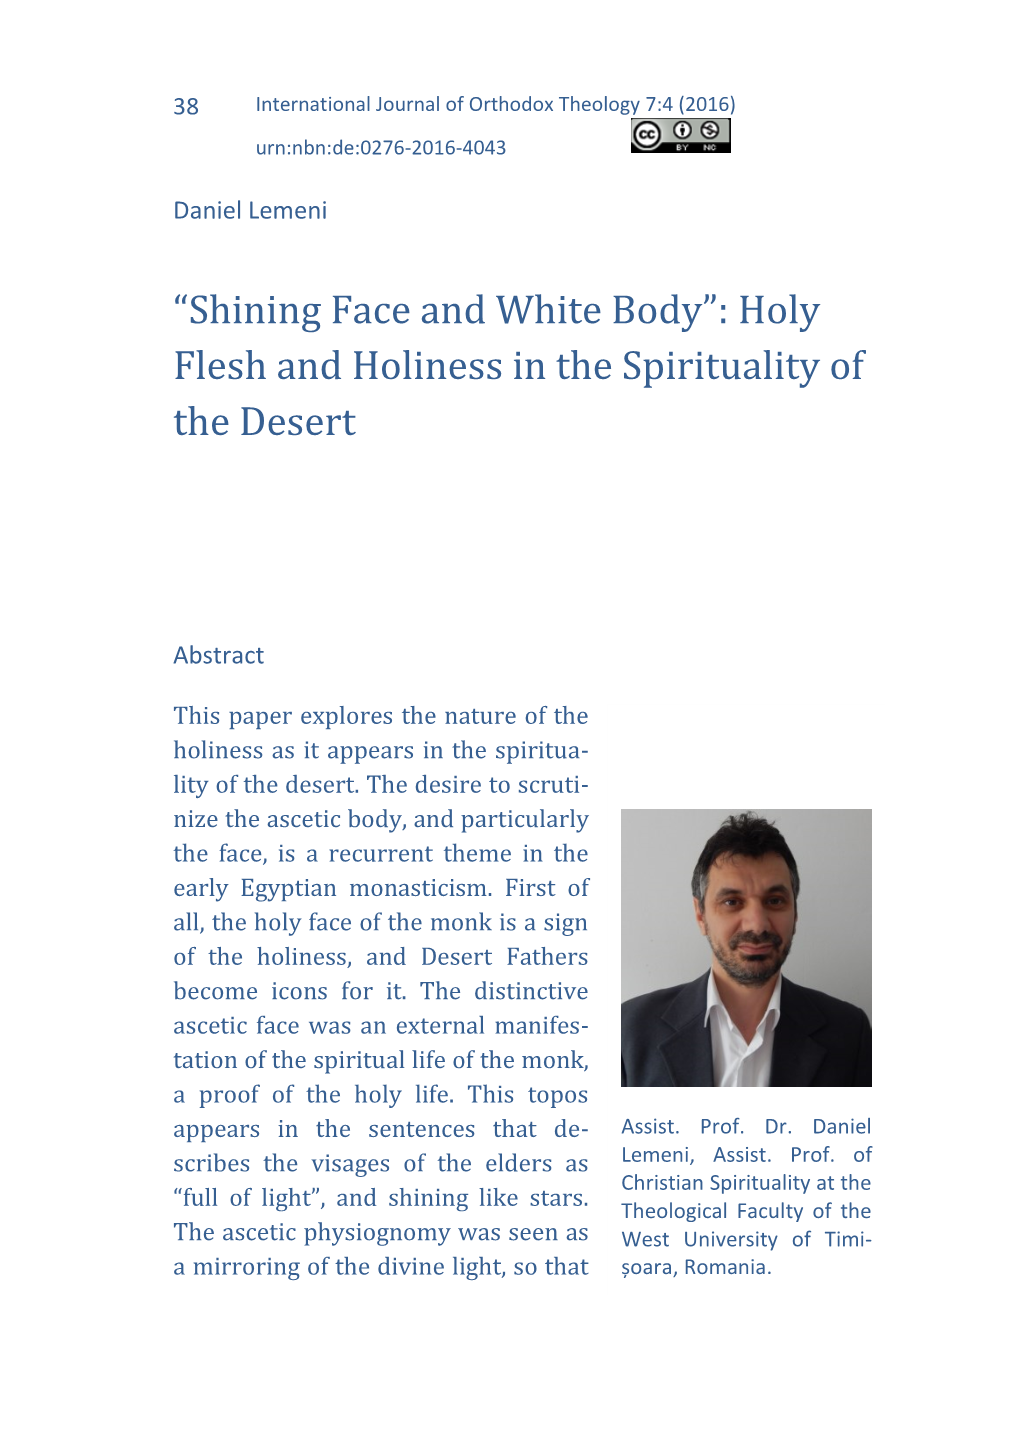 Holy Flesh and Holiness in the Spirituality of the Desert